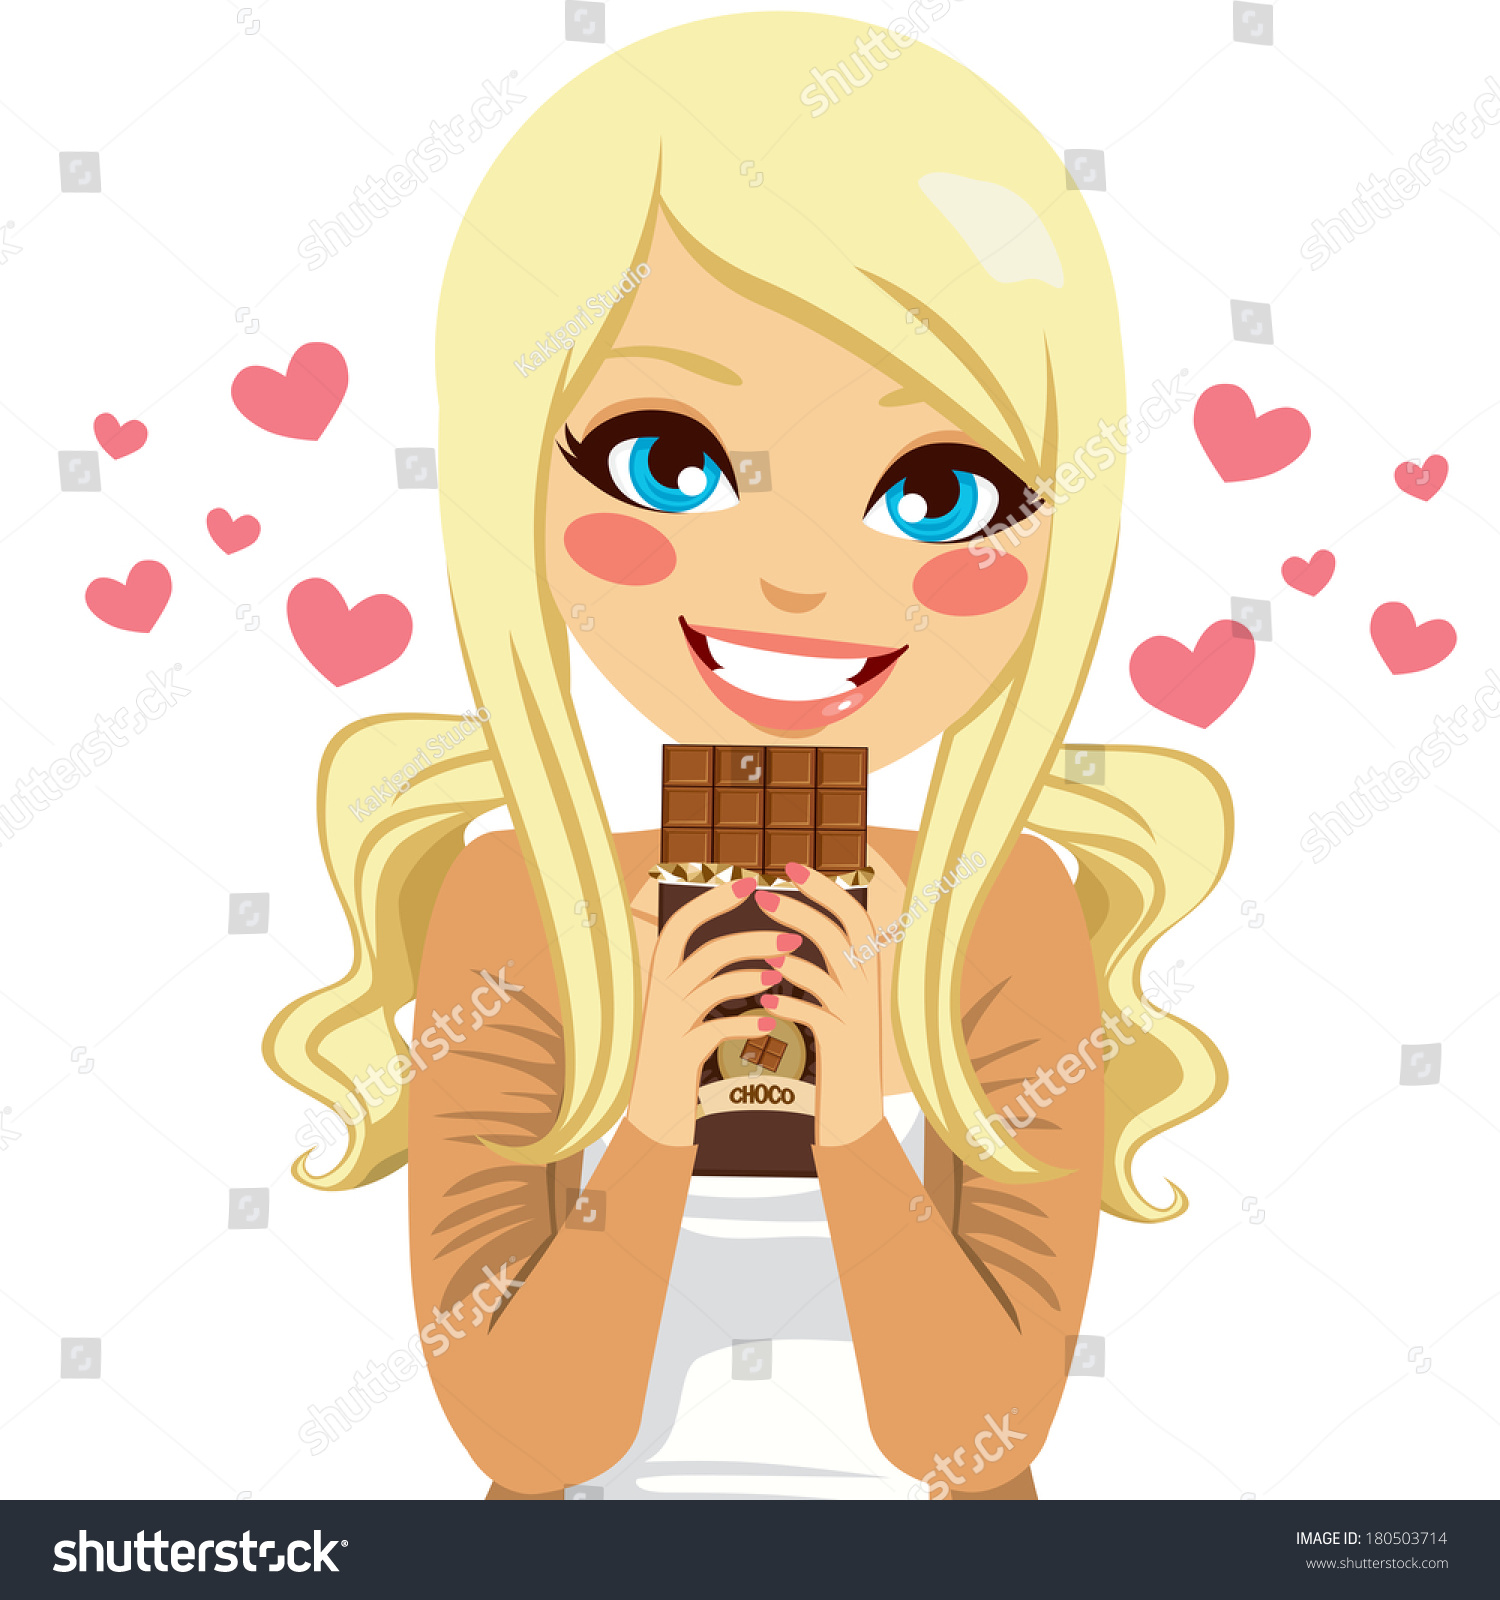 clipart girl eating chocolate - photo #8